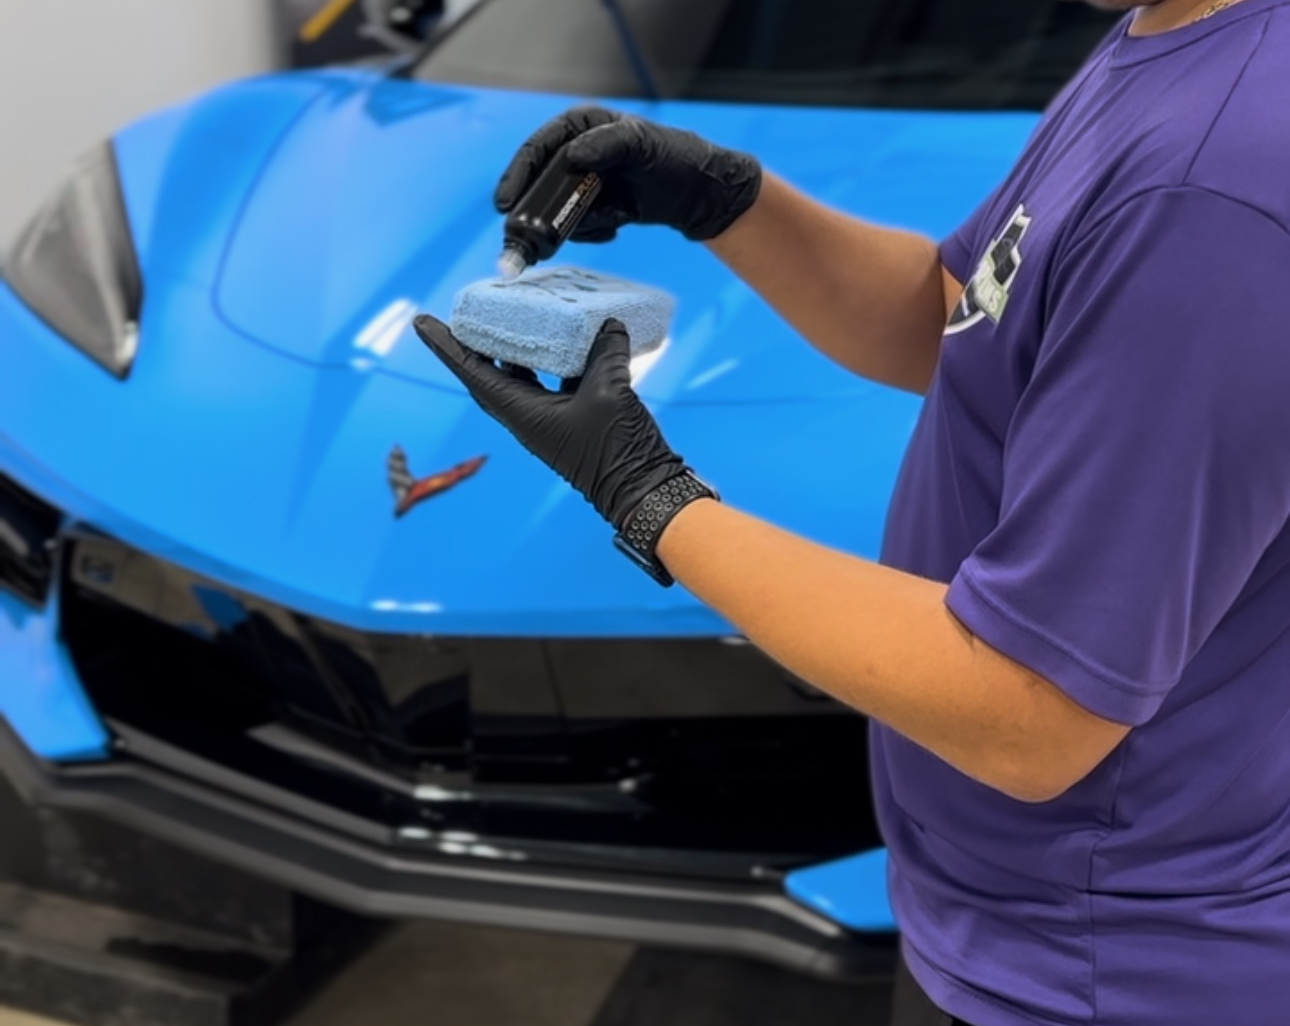 a man in a purple shirt is cleaning a blue car